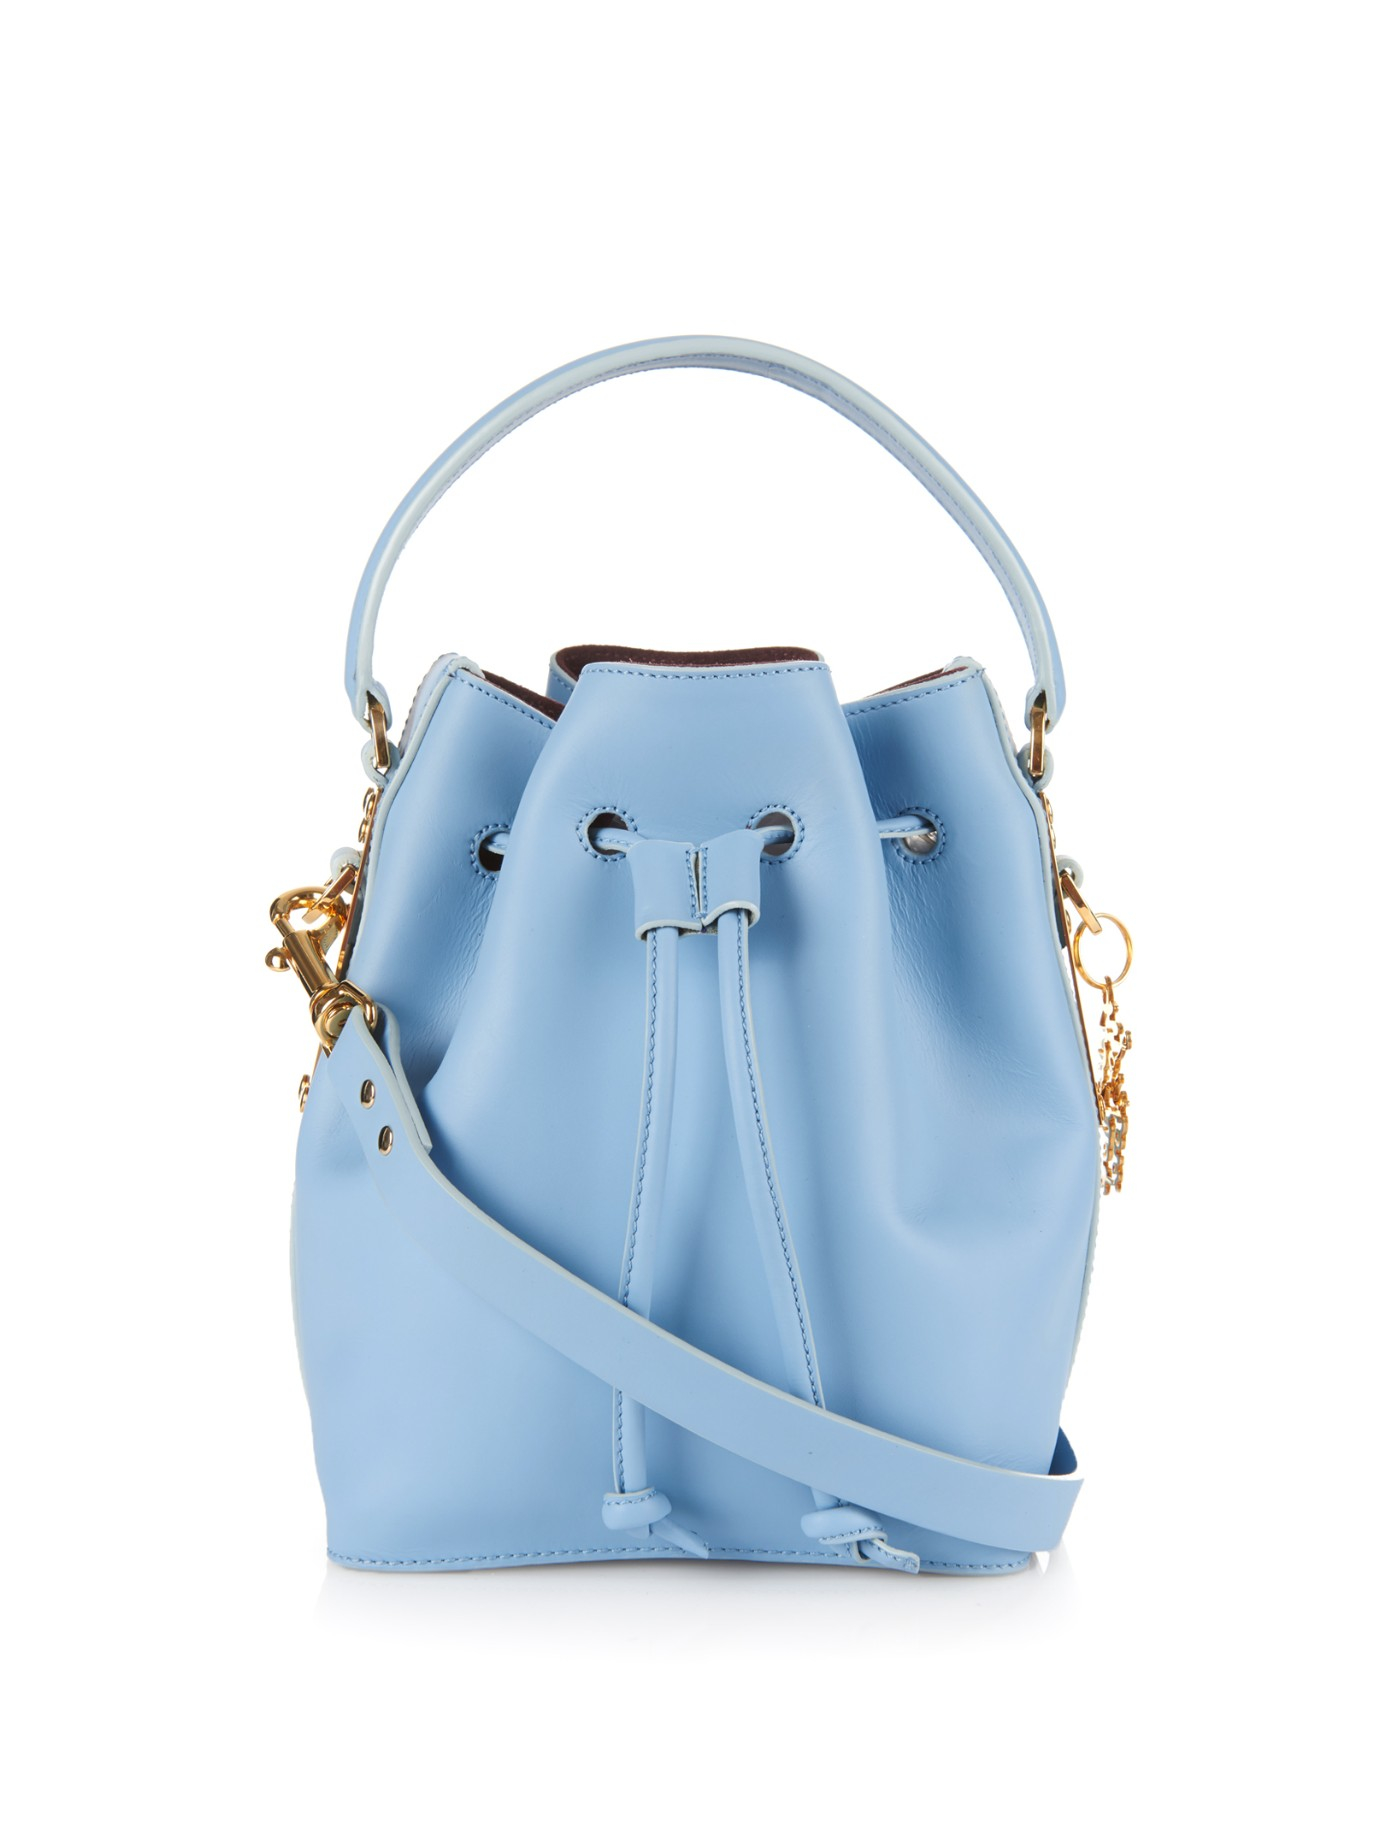 Lyst - Sophie Hulme Fleetwood Small Leather Bucket Bag in Blue